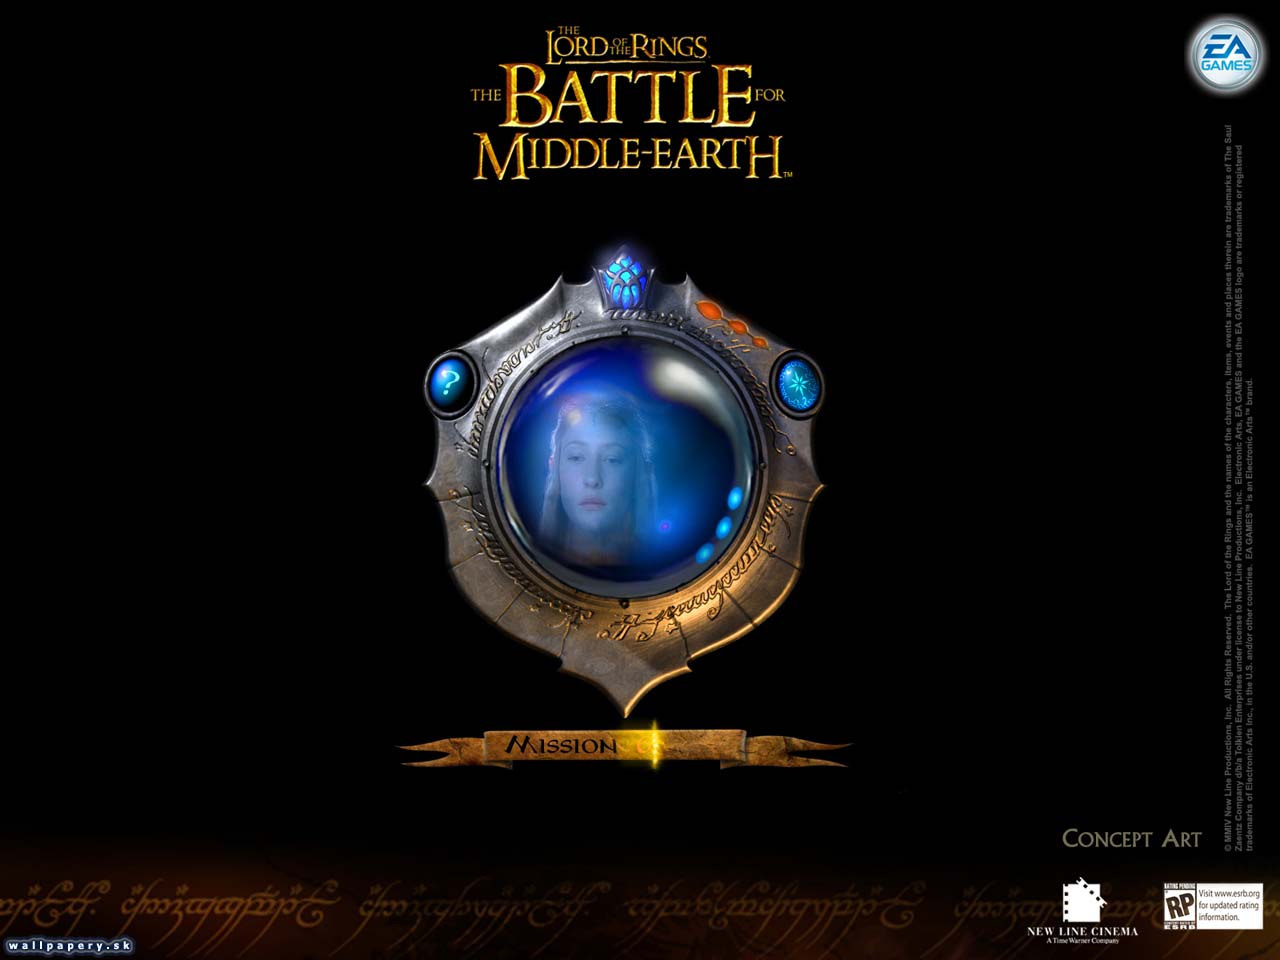 Lord of the Rings: The Battle For Middle-Earth - wallpaper 9